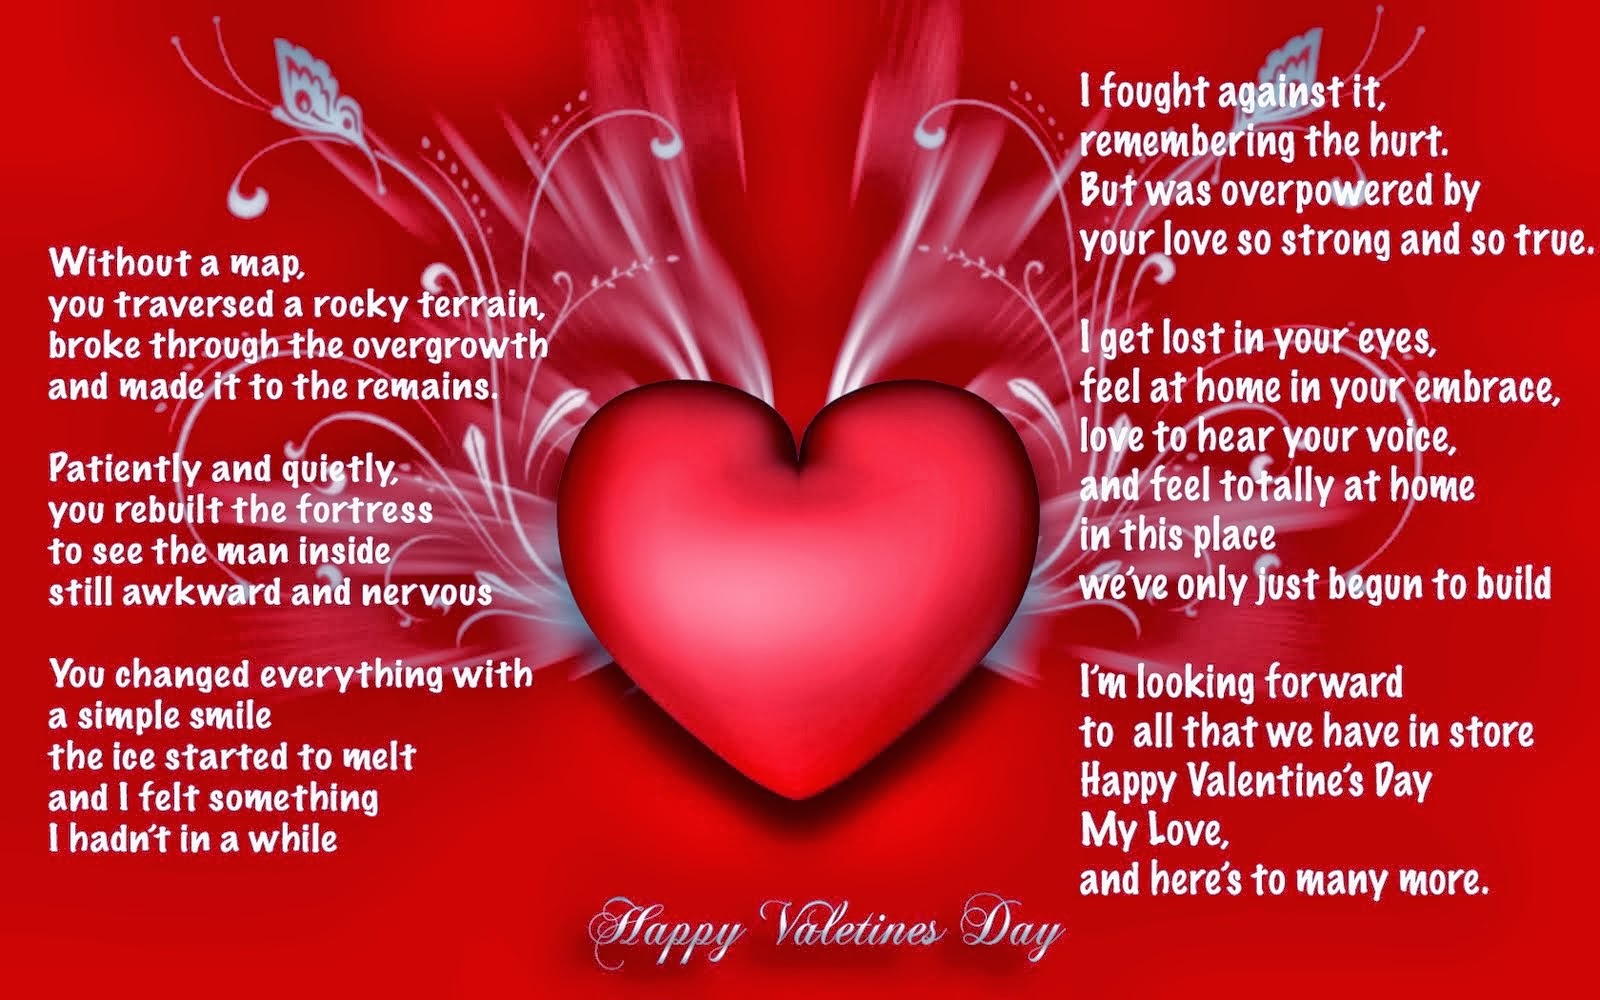 40 Best Valentine Day Messages – The WoW Style